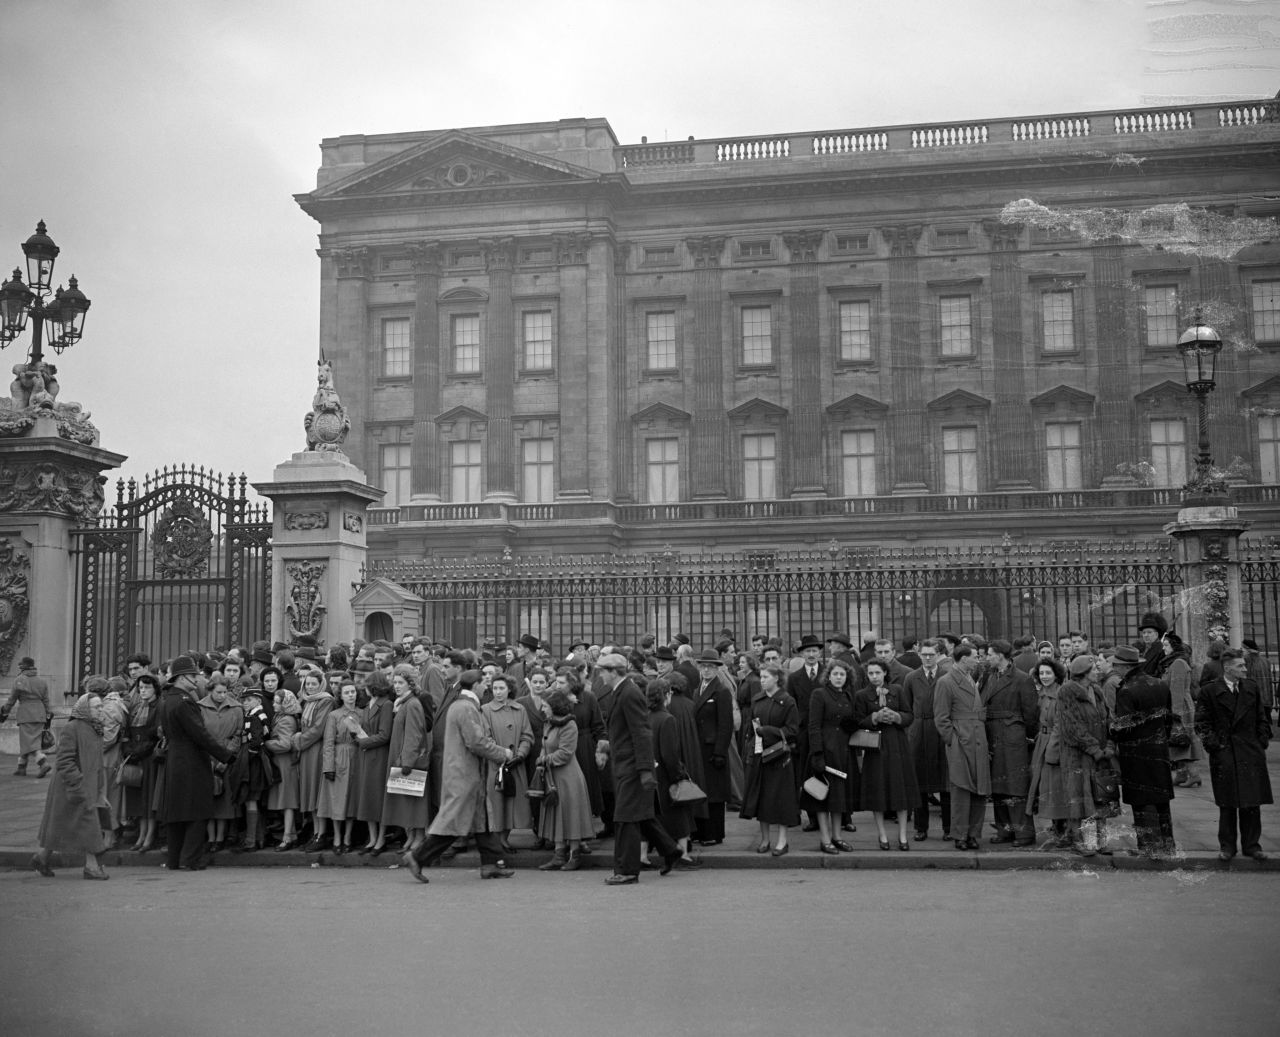 A crowd gathers outside Buckingham Palace following the news of the King's death.